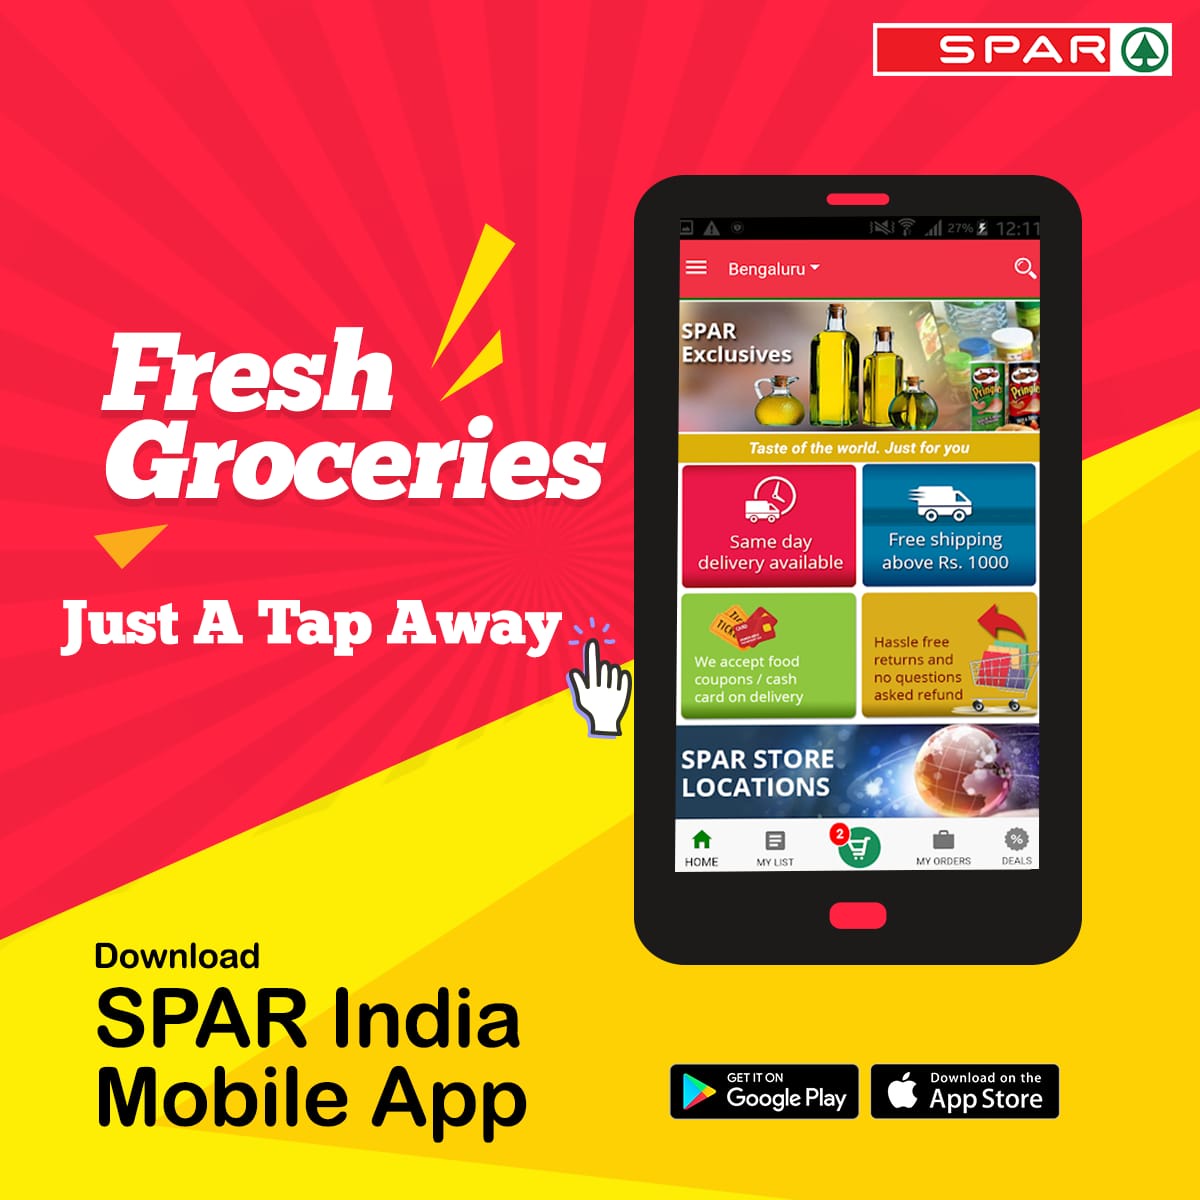 Fresh Finds: Unveiling the Best Online Grocery Shopping Apps